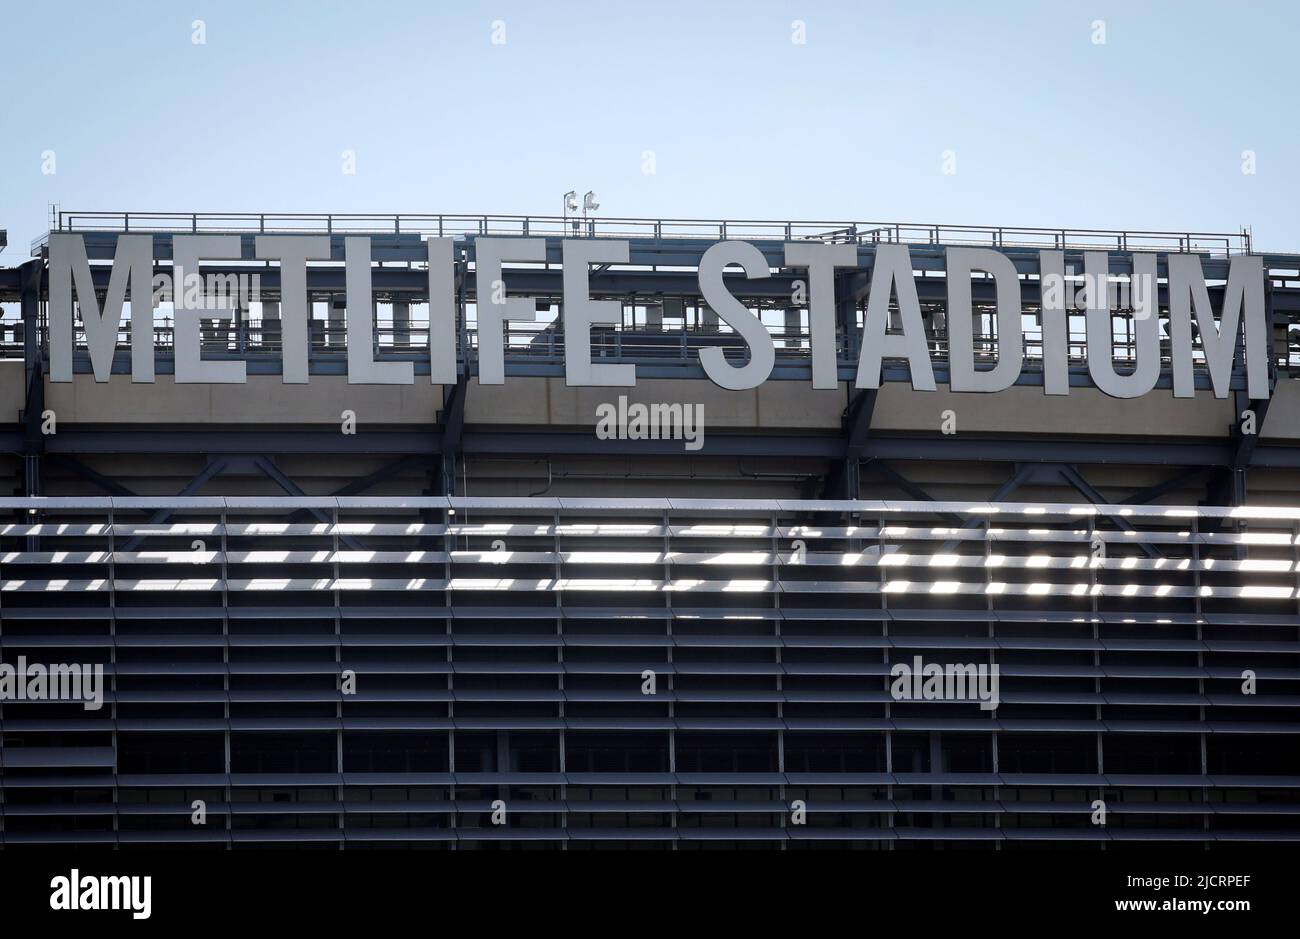 MetLife Stadium is pictured in East Rutherford, New Jersey, U.S. June 15, 2022. REUTERS/Mike Segar Stock Photo